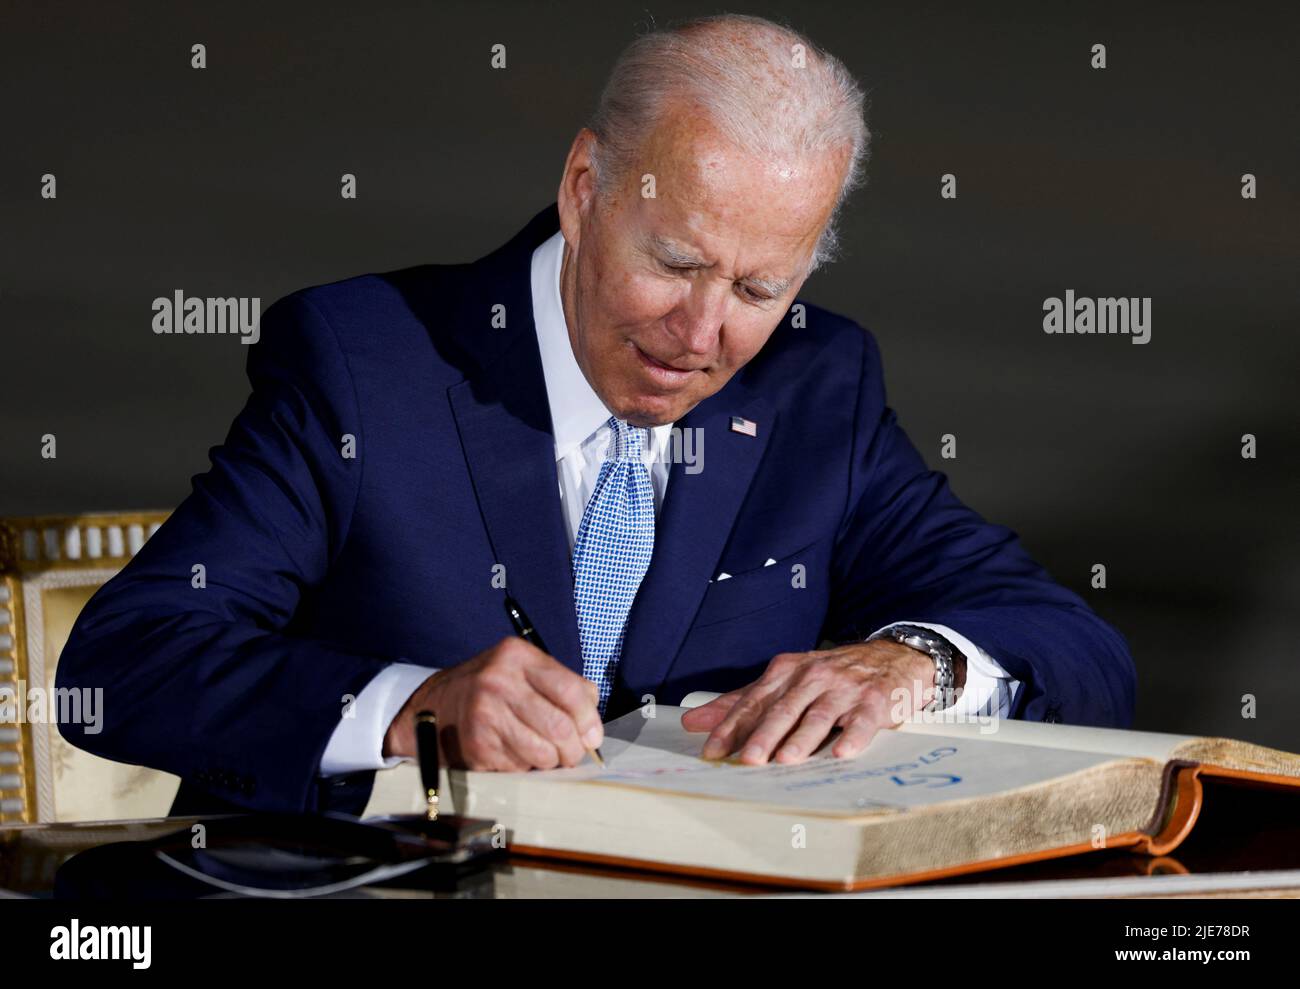 U.S. President Joe Biden signs the Golden Book of the Bavarian State government as he arrives for a G7 summit at Munich International Airport near Munich, Germany June 25, 2022. REUTERS/Michaela Rehle Stock Photo